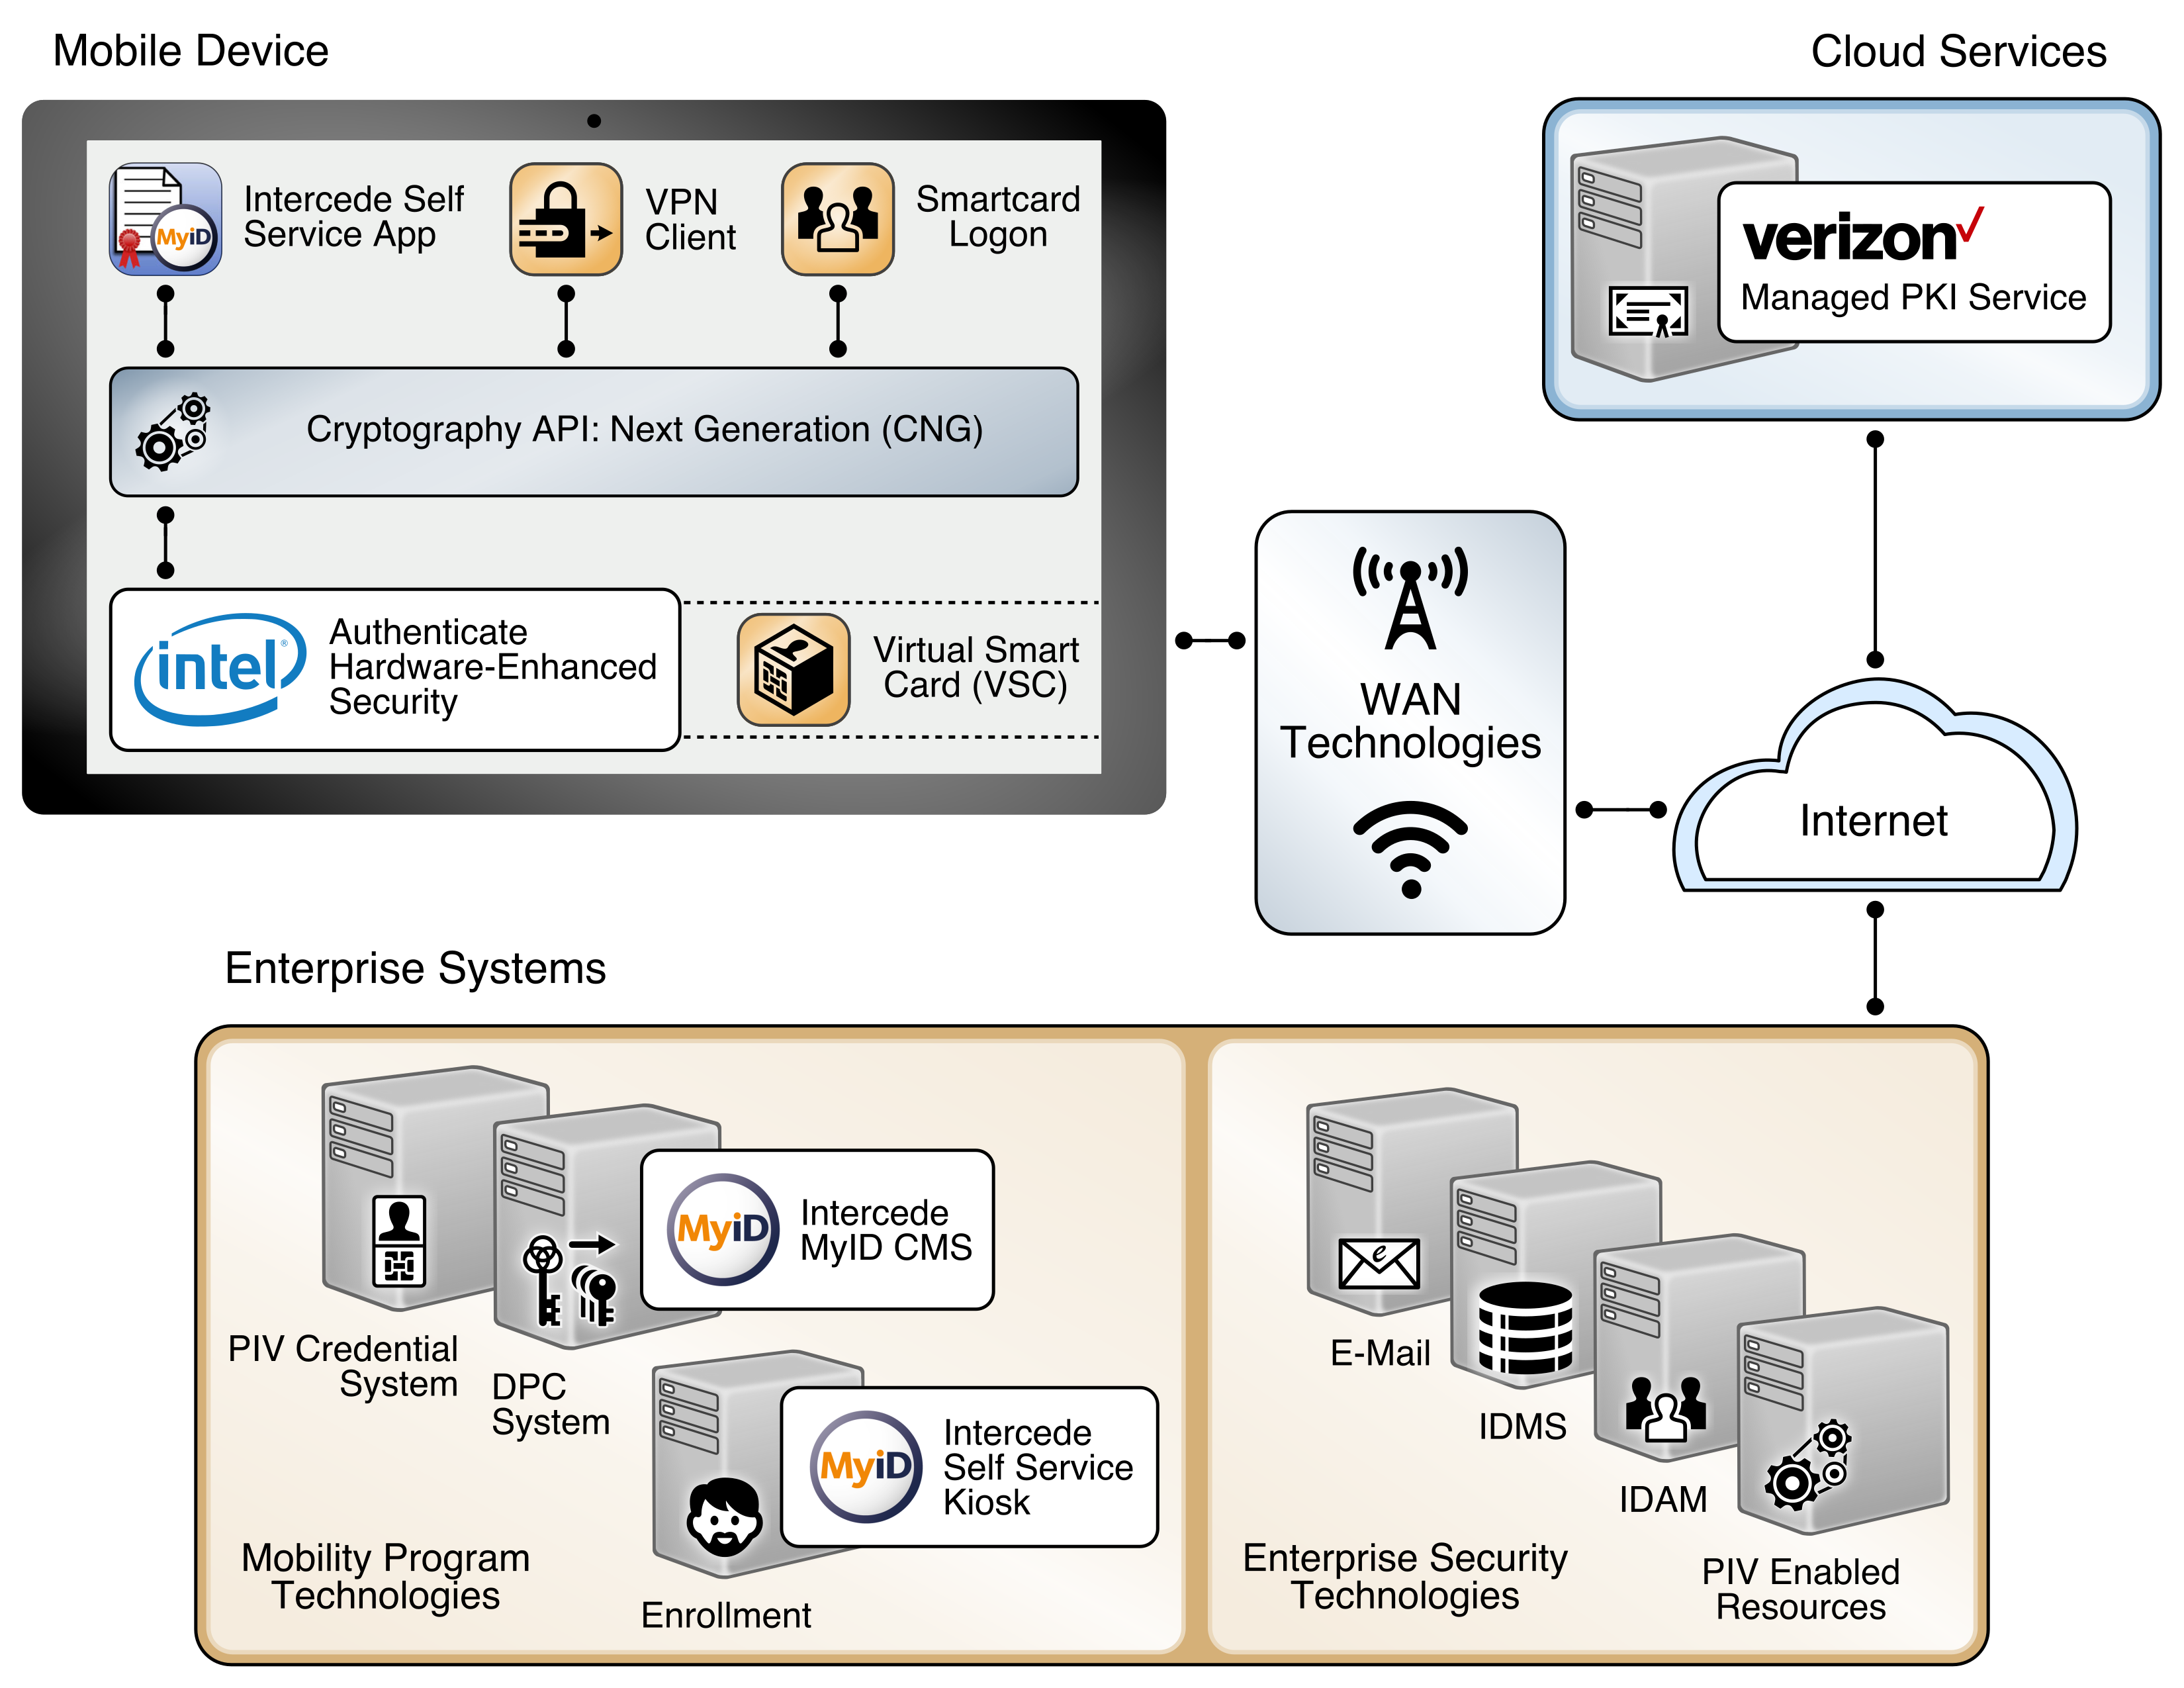 This figure depicts the architecture when an Intel-based device that supports Intel Authenticate is used to store the DPC. Here, the Intercede self-service application is used to manage issuing the DPC.